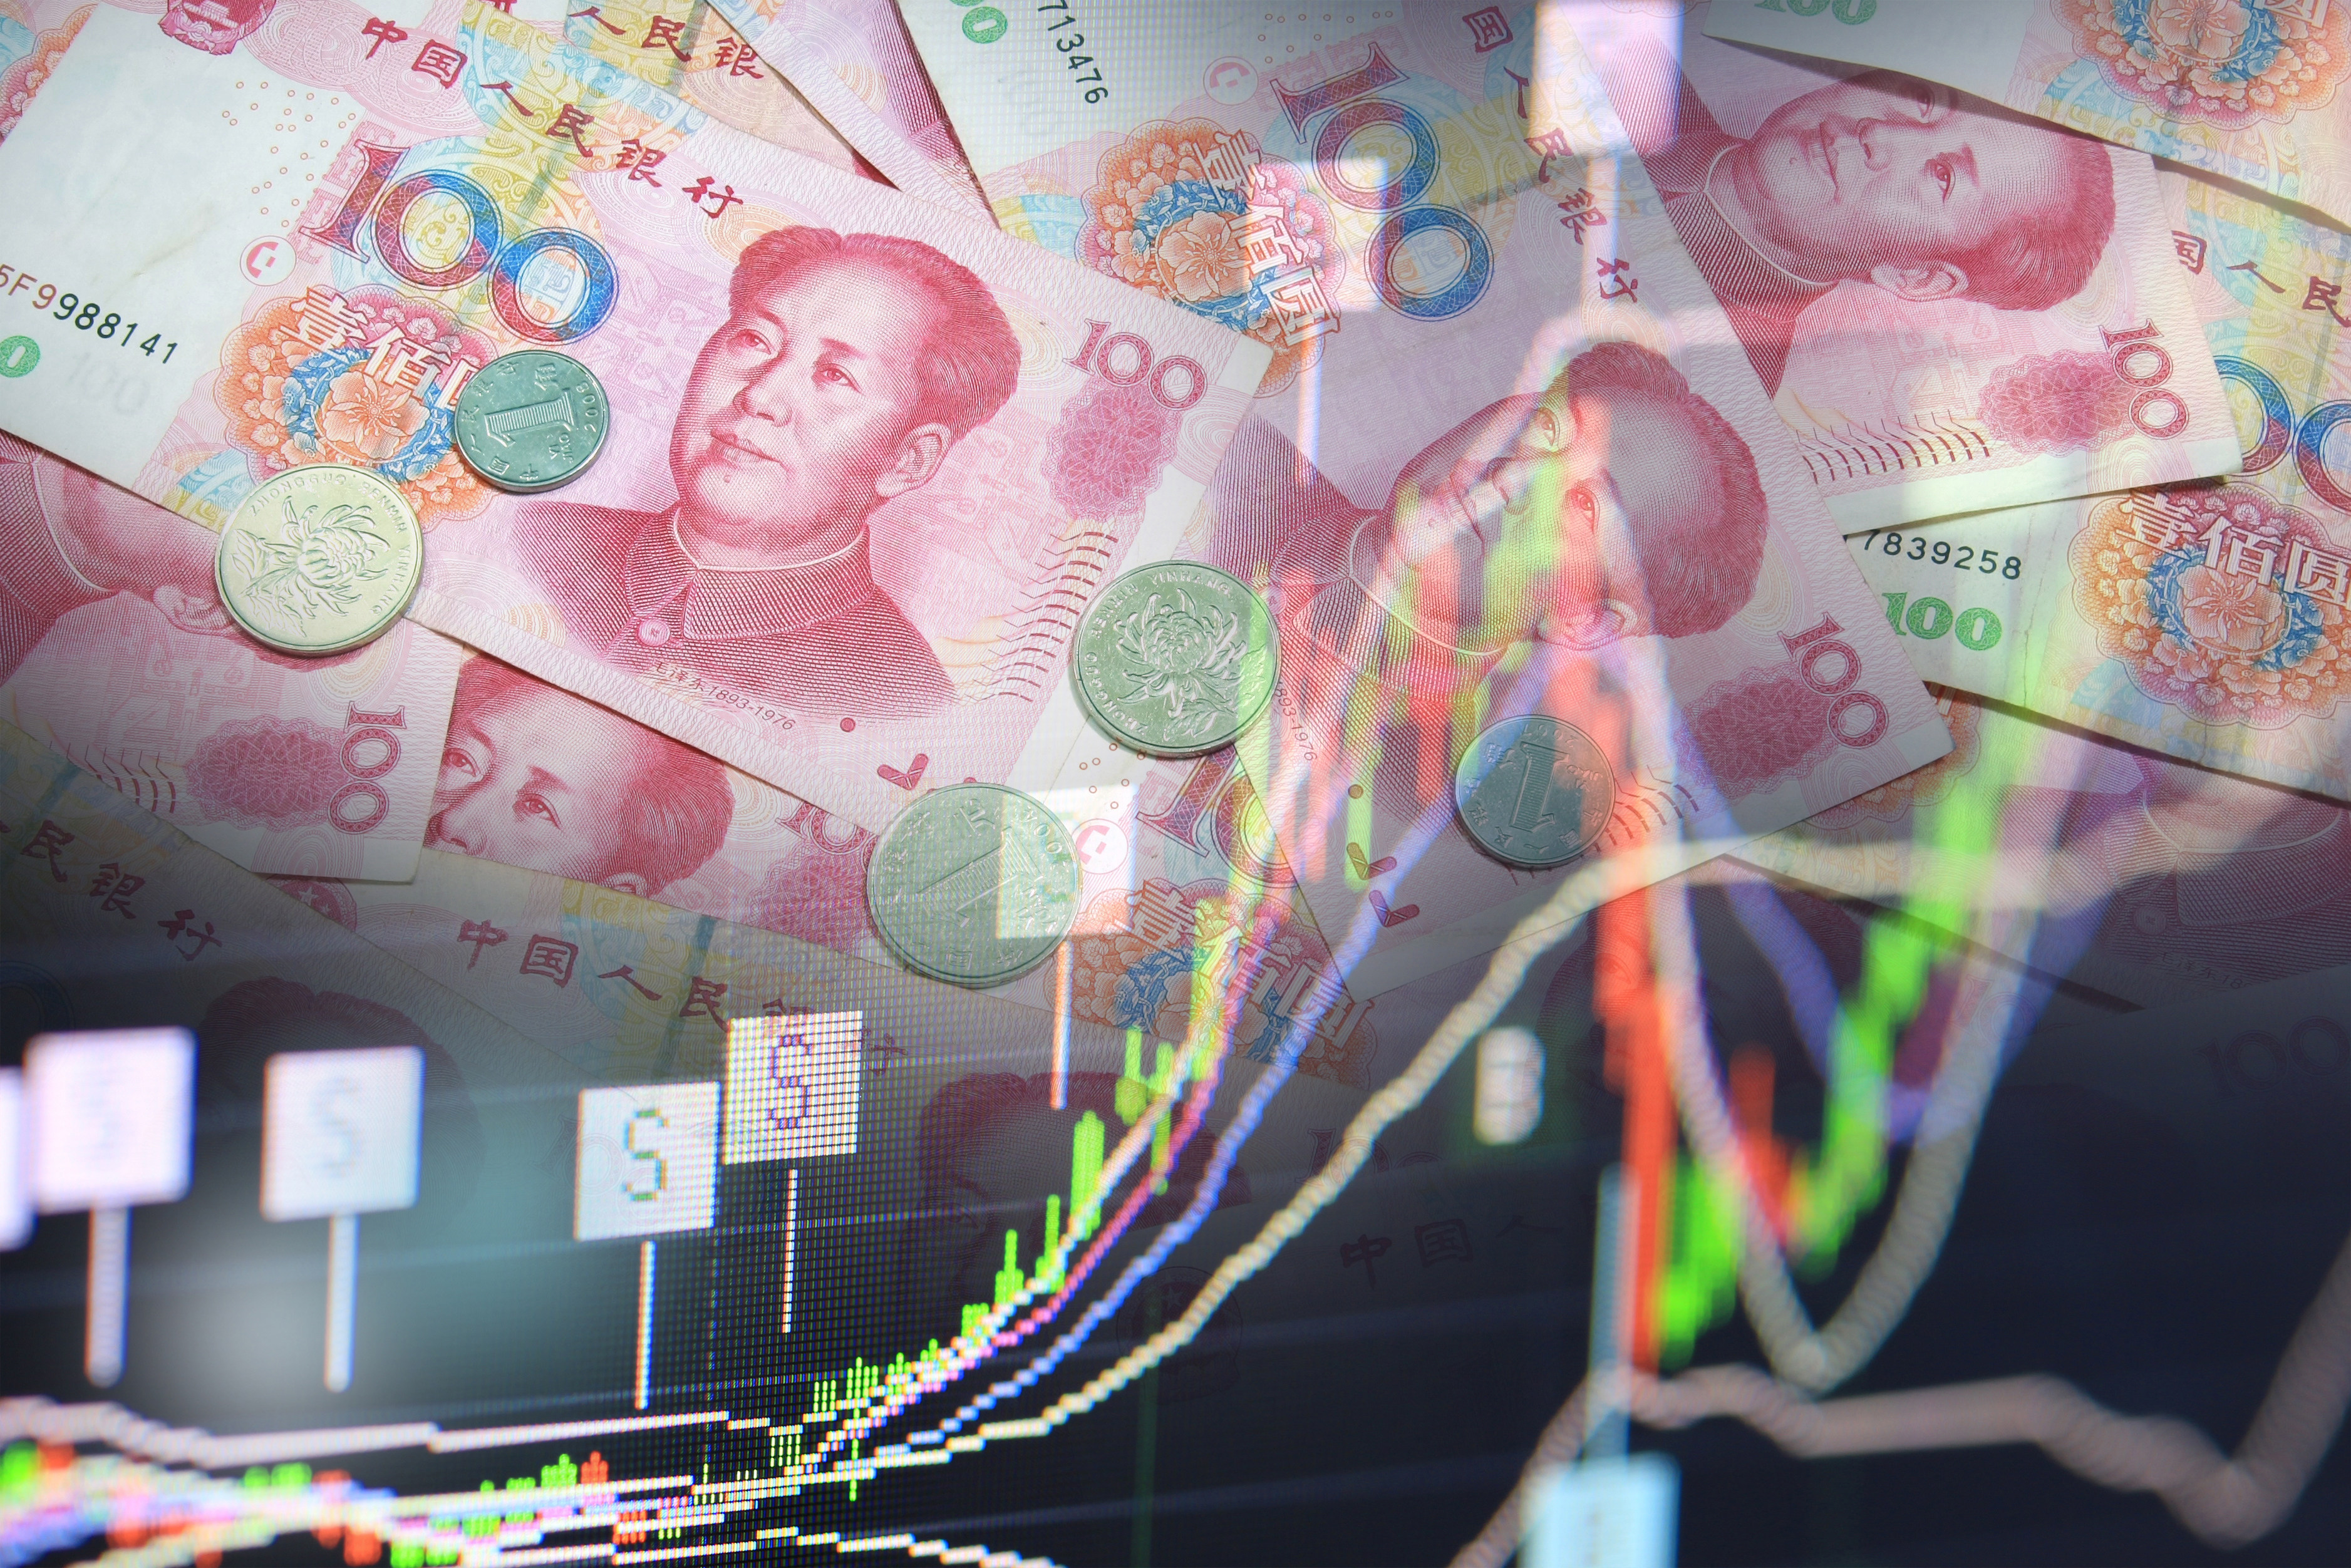 Predictions of China’s economic growth have fluctuated wildly over the past year, as several confounding factors have diminished the accuracy of projections. Photo: Shutterstock